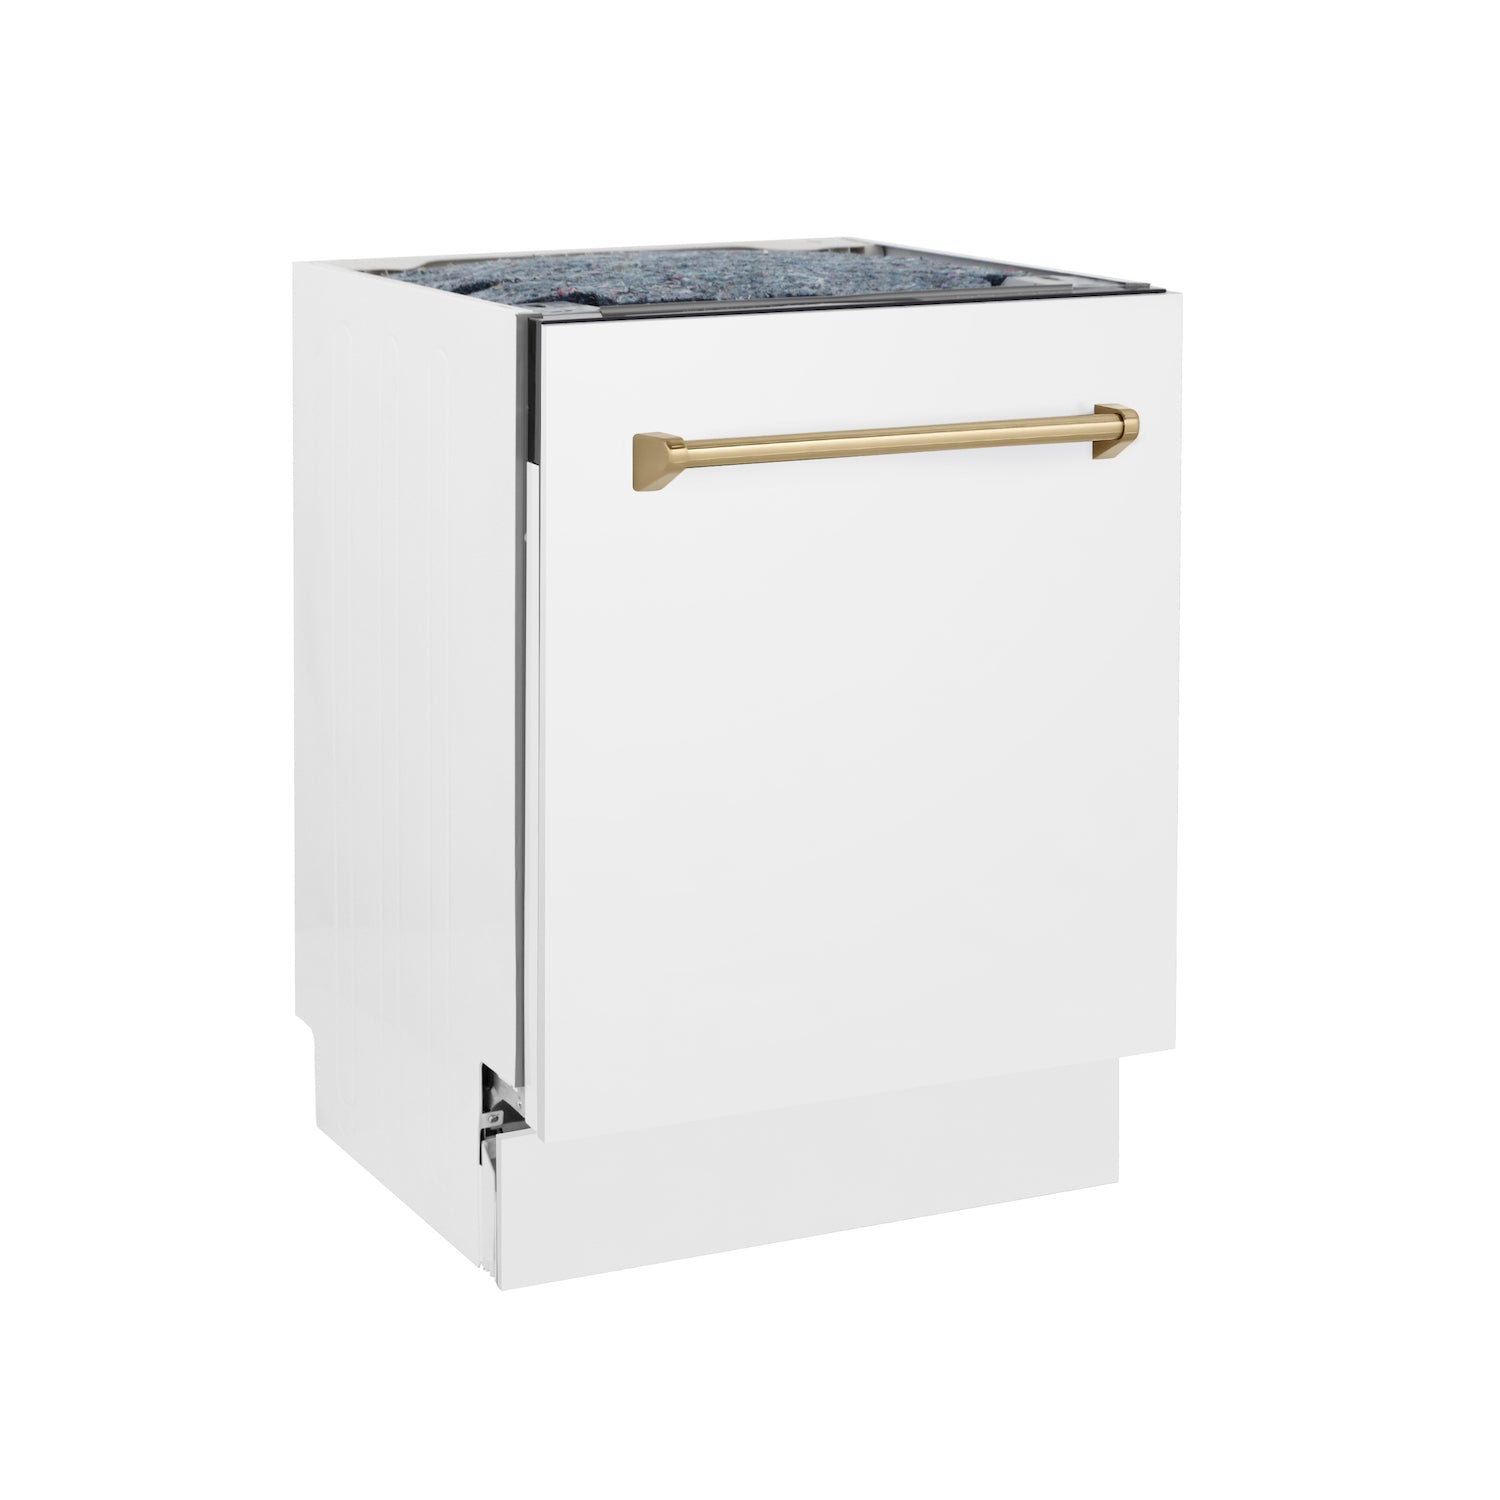 ZLINE Autograph Edition 24" 3rd Rack Top Control Tall Tub Dishwasher in White Matte with Champagne Bronze Handle, 51dBa (DWVZ-WM-24-CB)